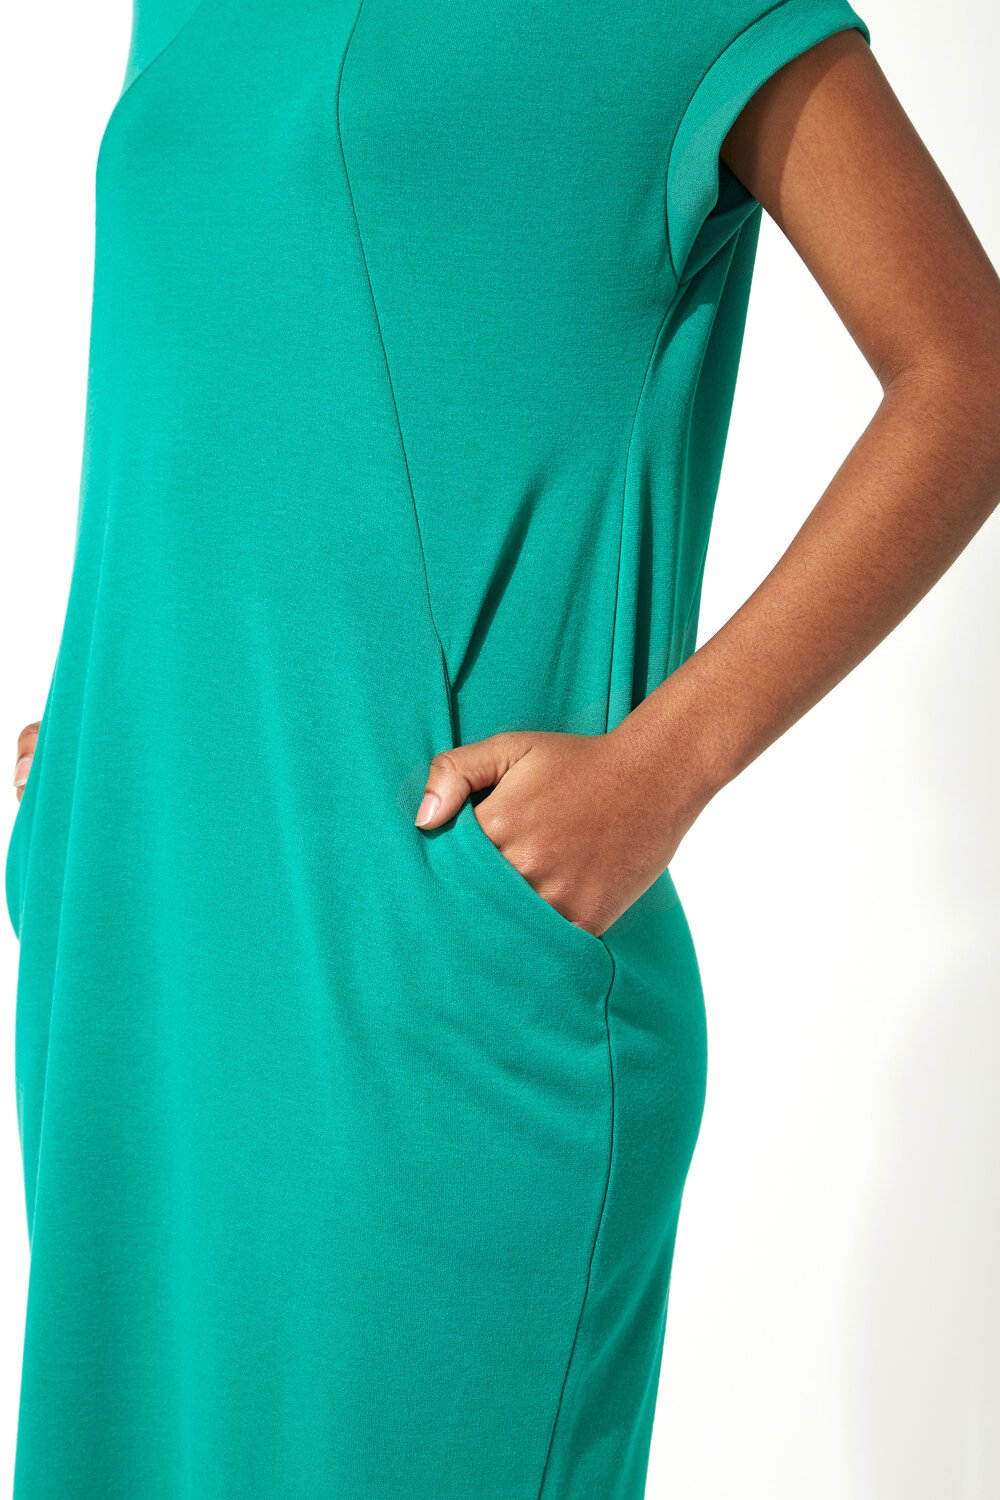 Green Relaxed Fit Crepe Dress, Image 4 of 5